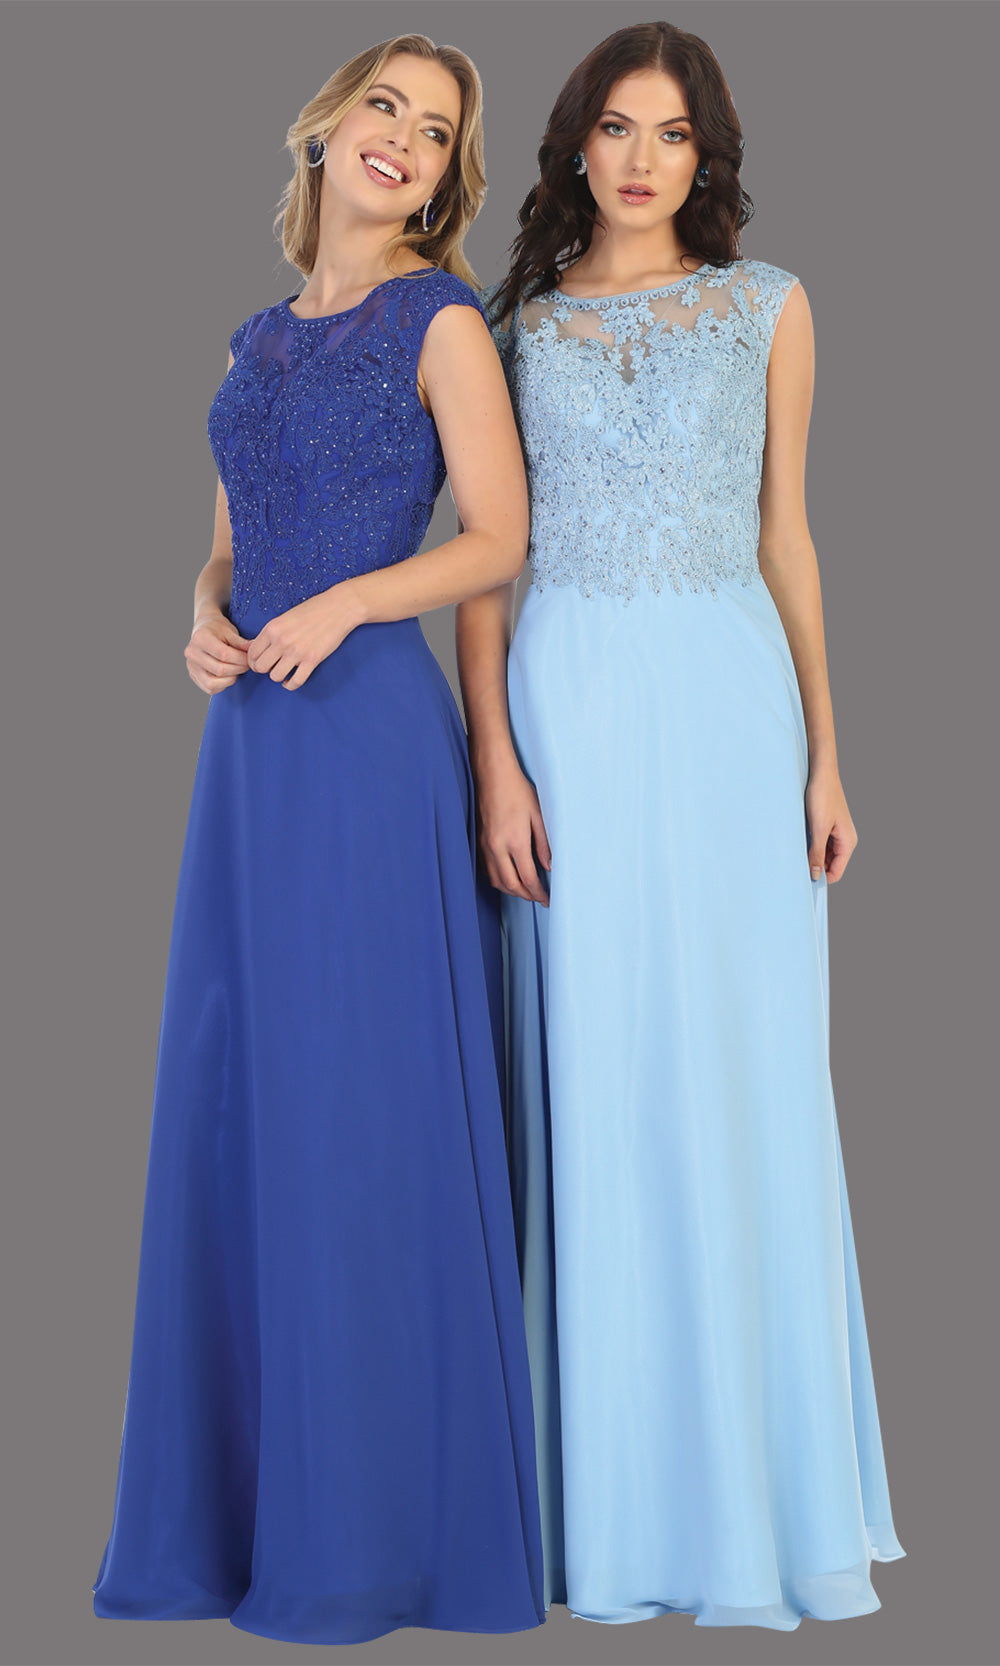 Mayqueen MQ1725 long royal blue flowy dress with high neck & high back. This royal blue dress is perfect for bridesmaid dresses, simple wedding guest dress, prom dress, gala, black tie wedding. Plus sizes are available, evening party dress.jpg